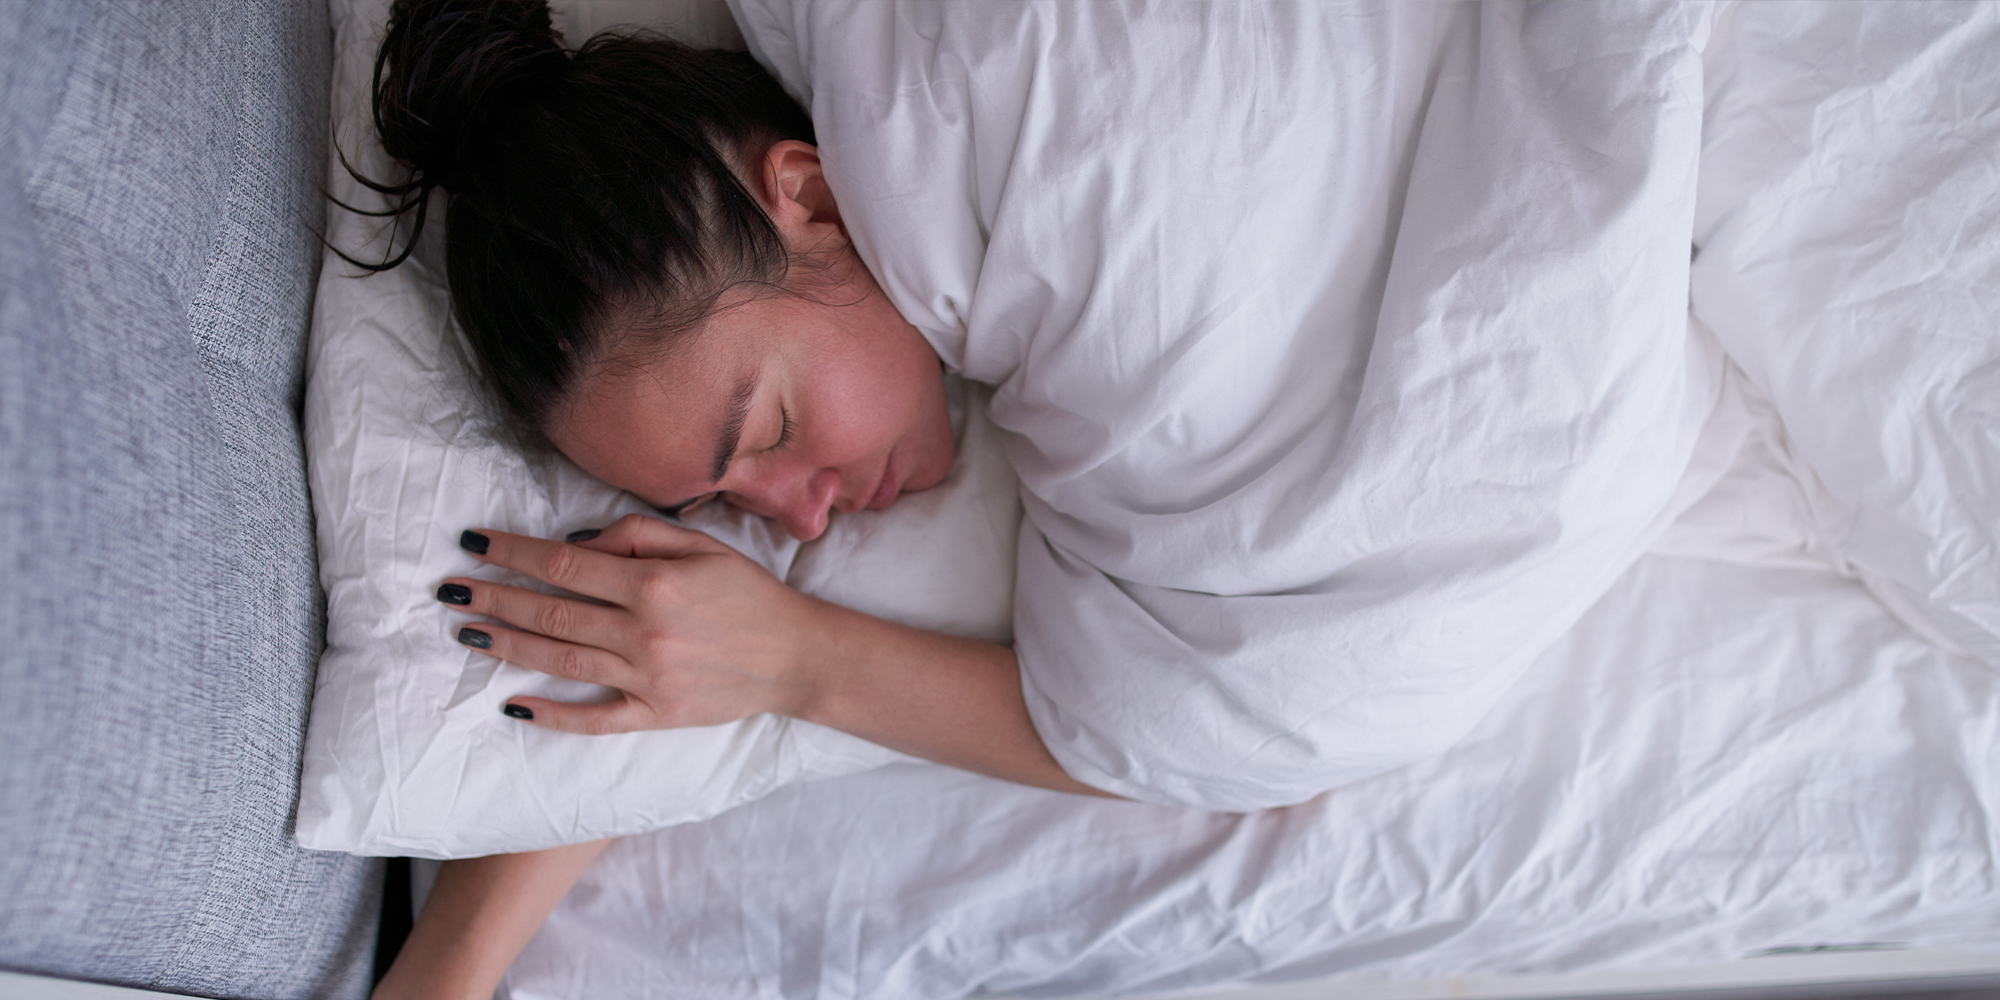 Why is Sleep Important? And Other Sleep Questions Answered